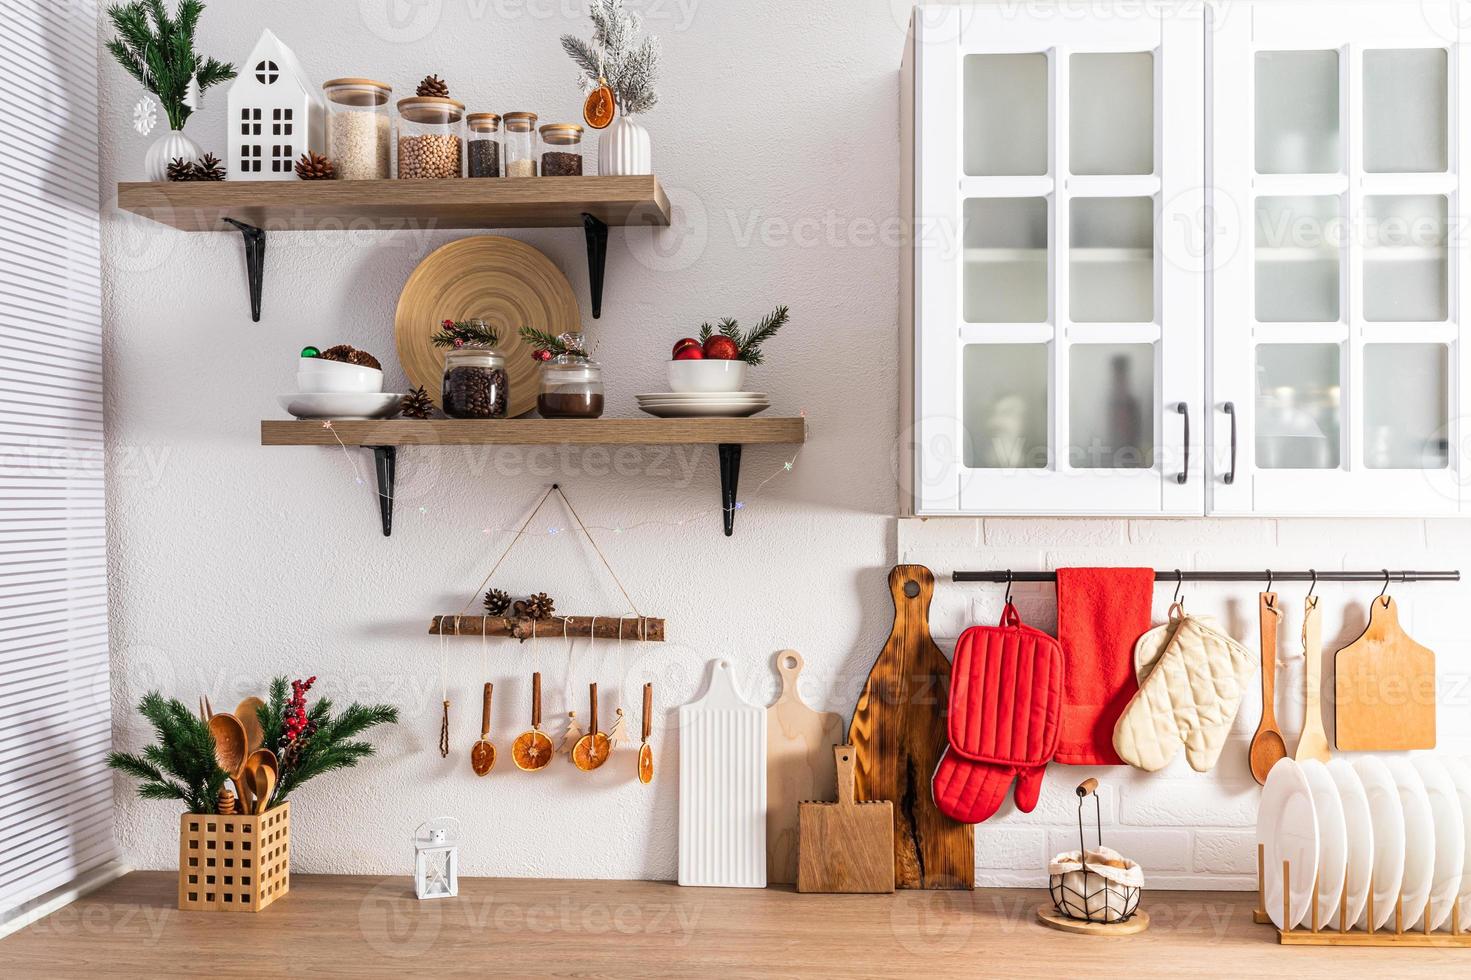 The front view of part of a modern white kitchen and open shelves decorated for New Year in traditional colors. Eco items and homemade decorations. photo